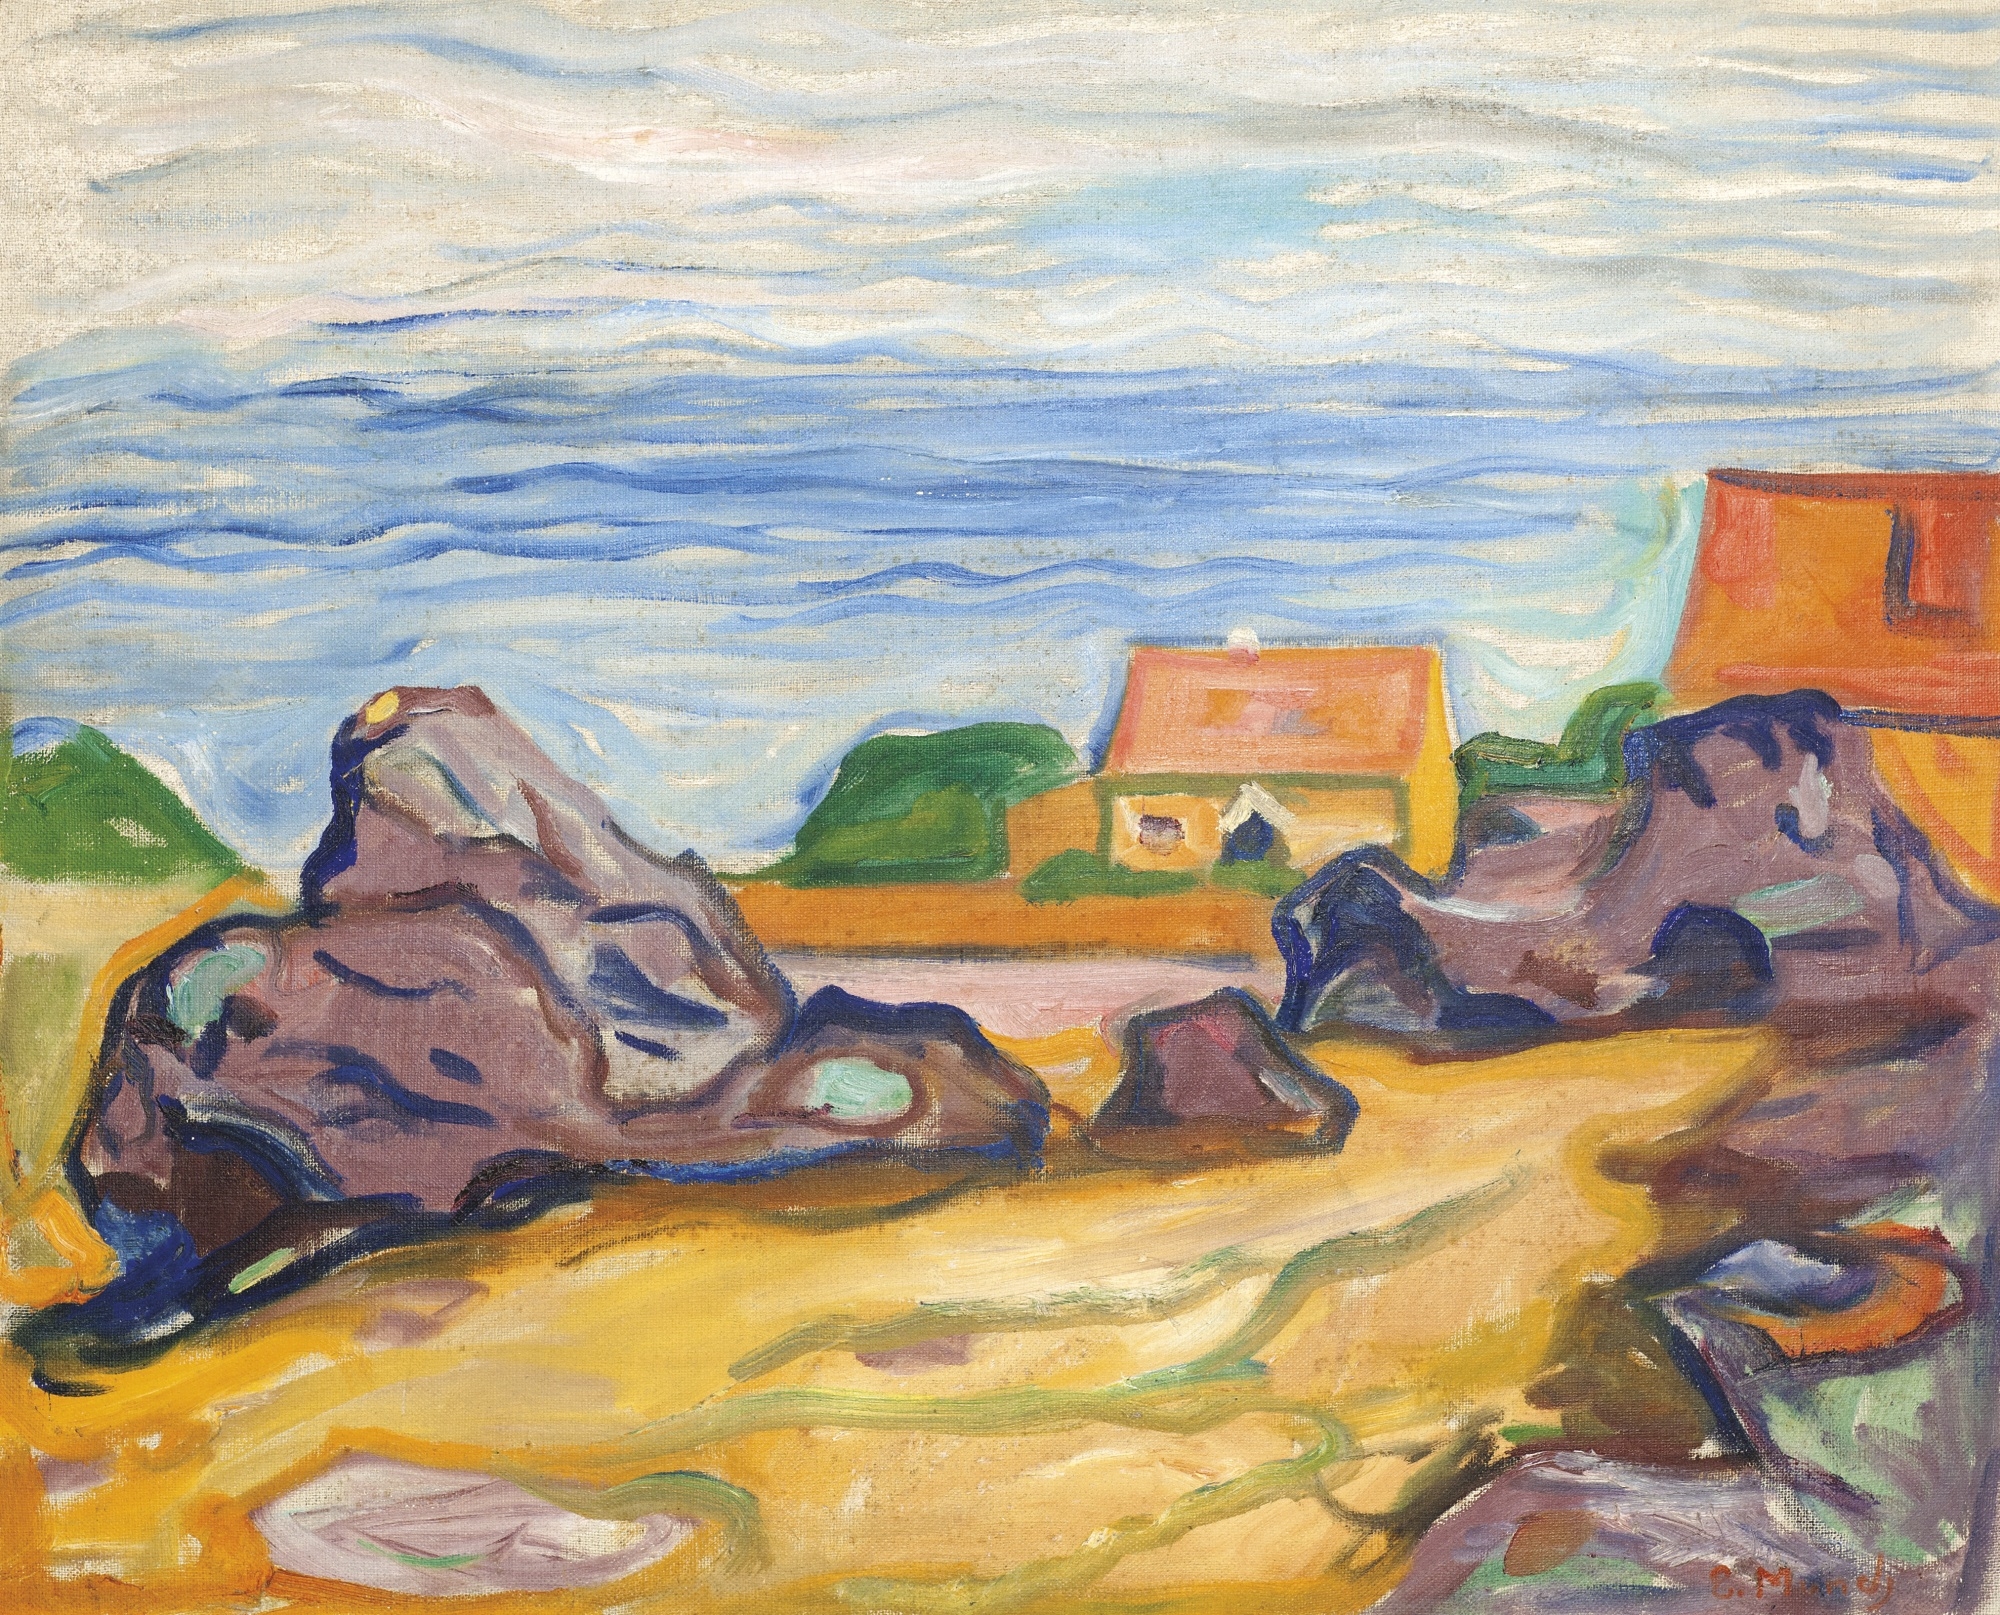 HUS I BORRE (HOUSE IN BORRE) by Edvard Munch, 1904-1905